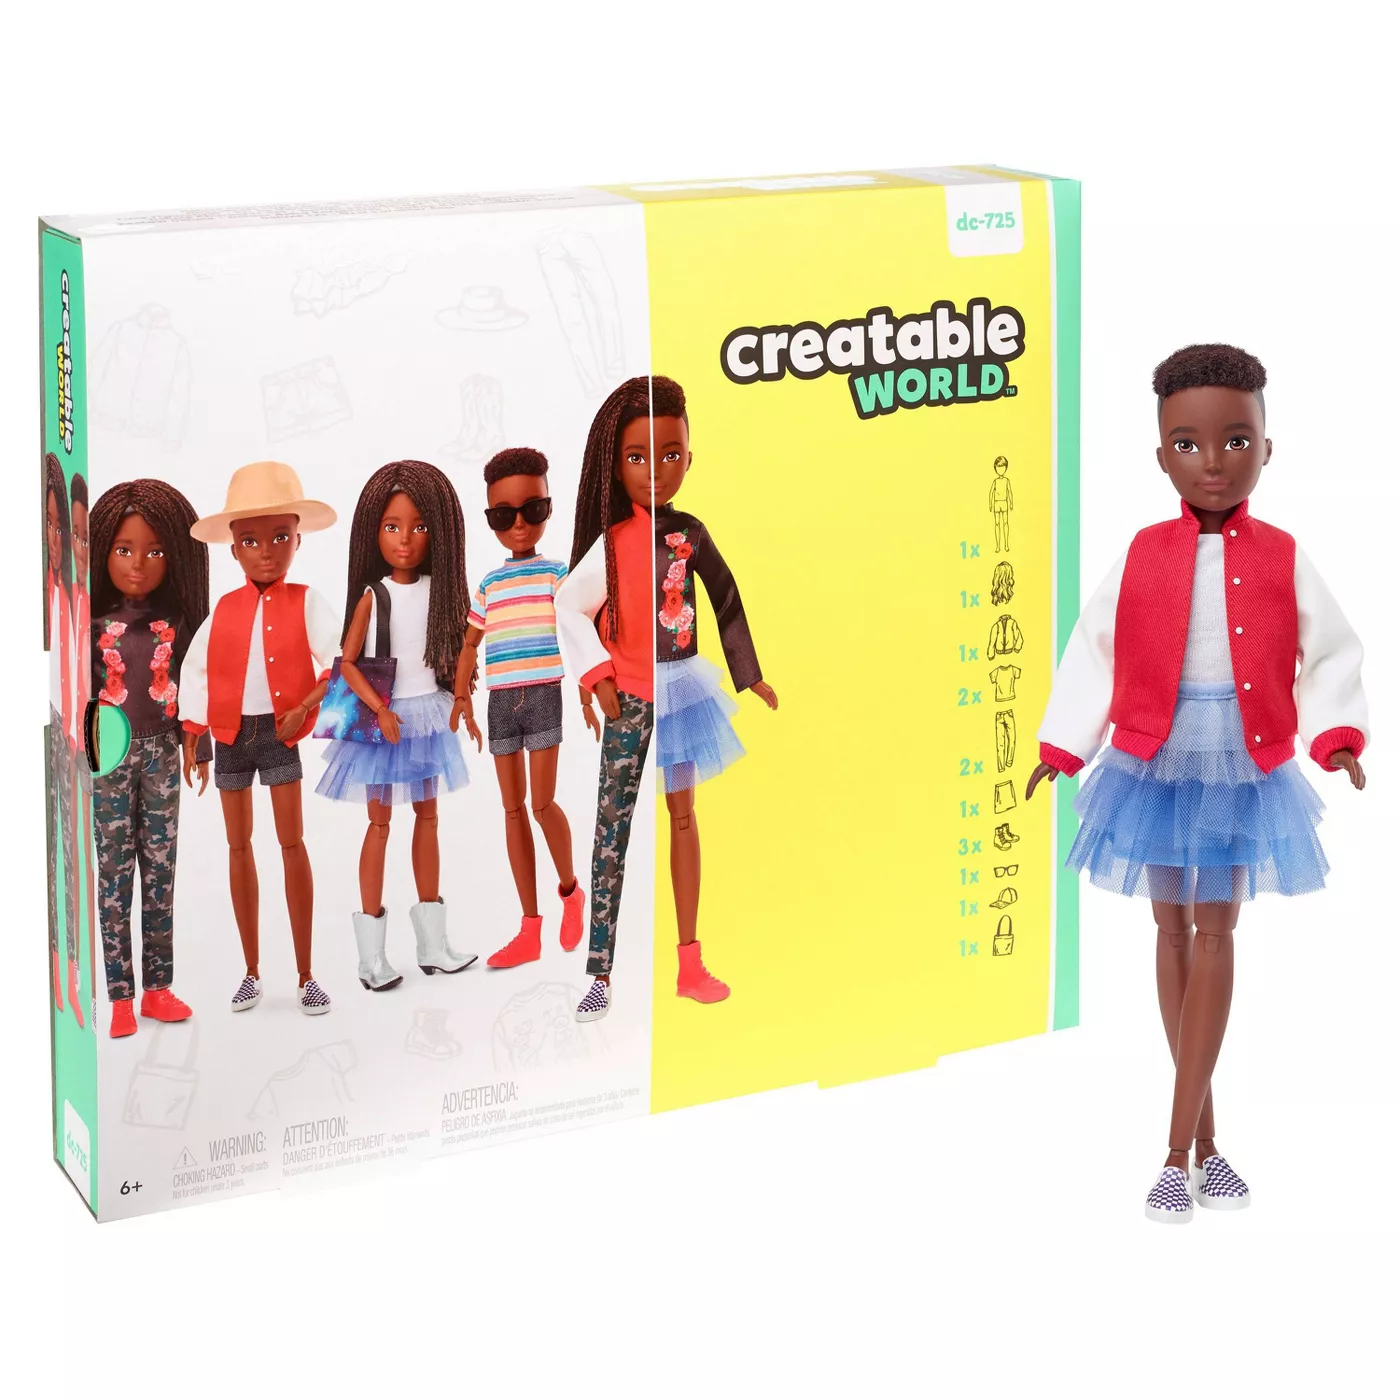 Creatable World Deluxe Character Kit Customizable Doll - Black Braided Hair - image 1 of 6